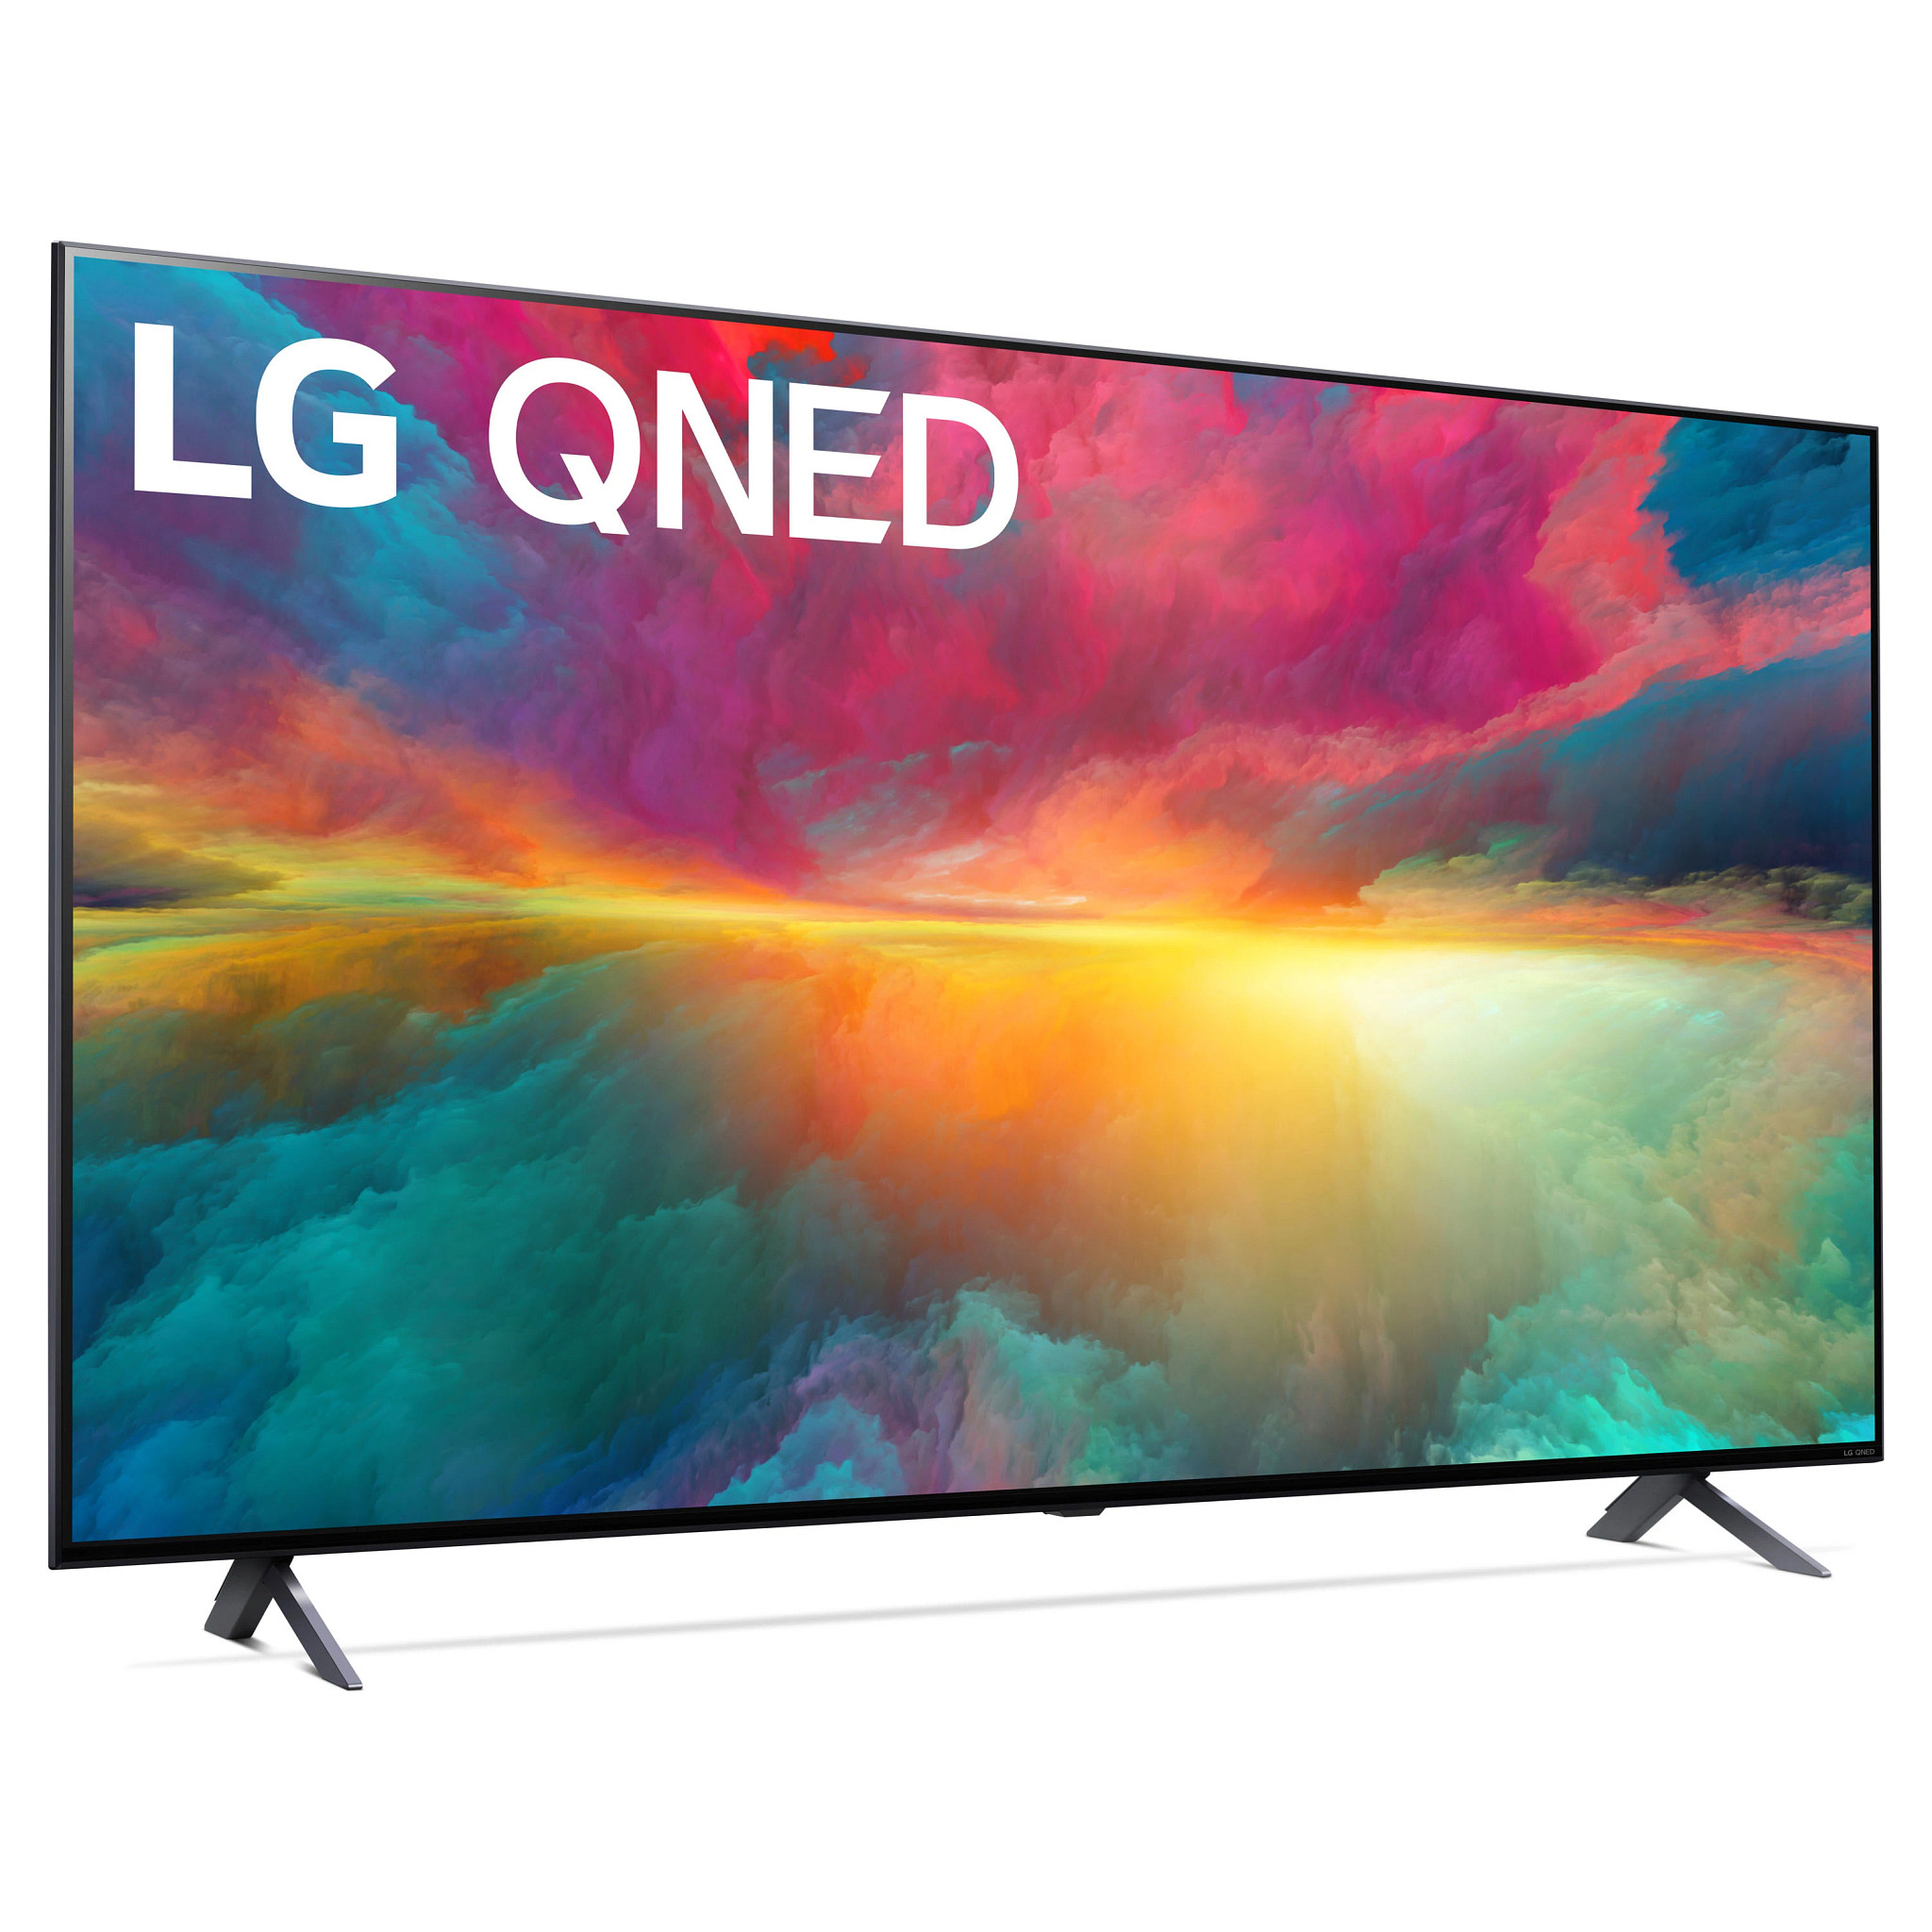 LG 55" Class 4K UHD QNED Web OS Smart TV with HDR 75 Series (55QNED75URA) - image 3 of 7